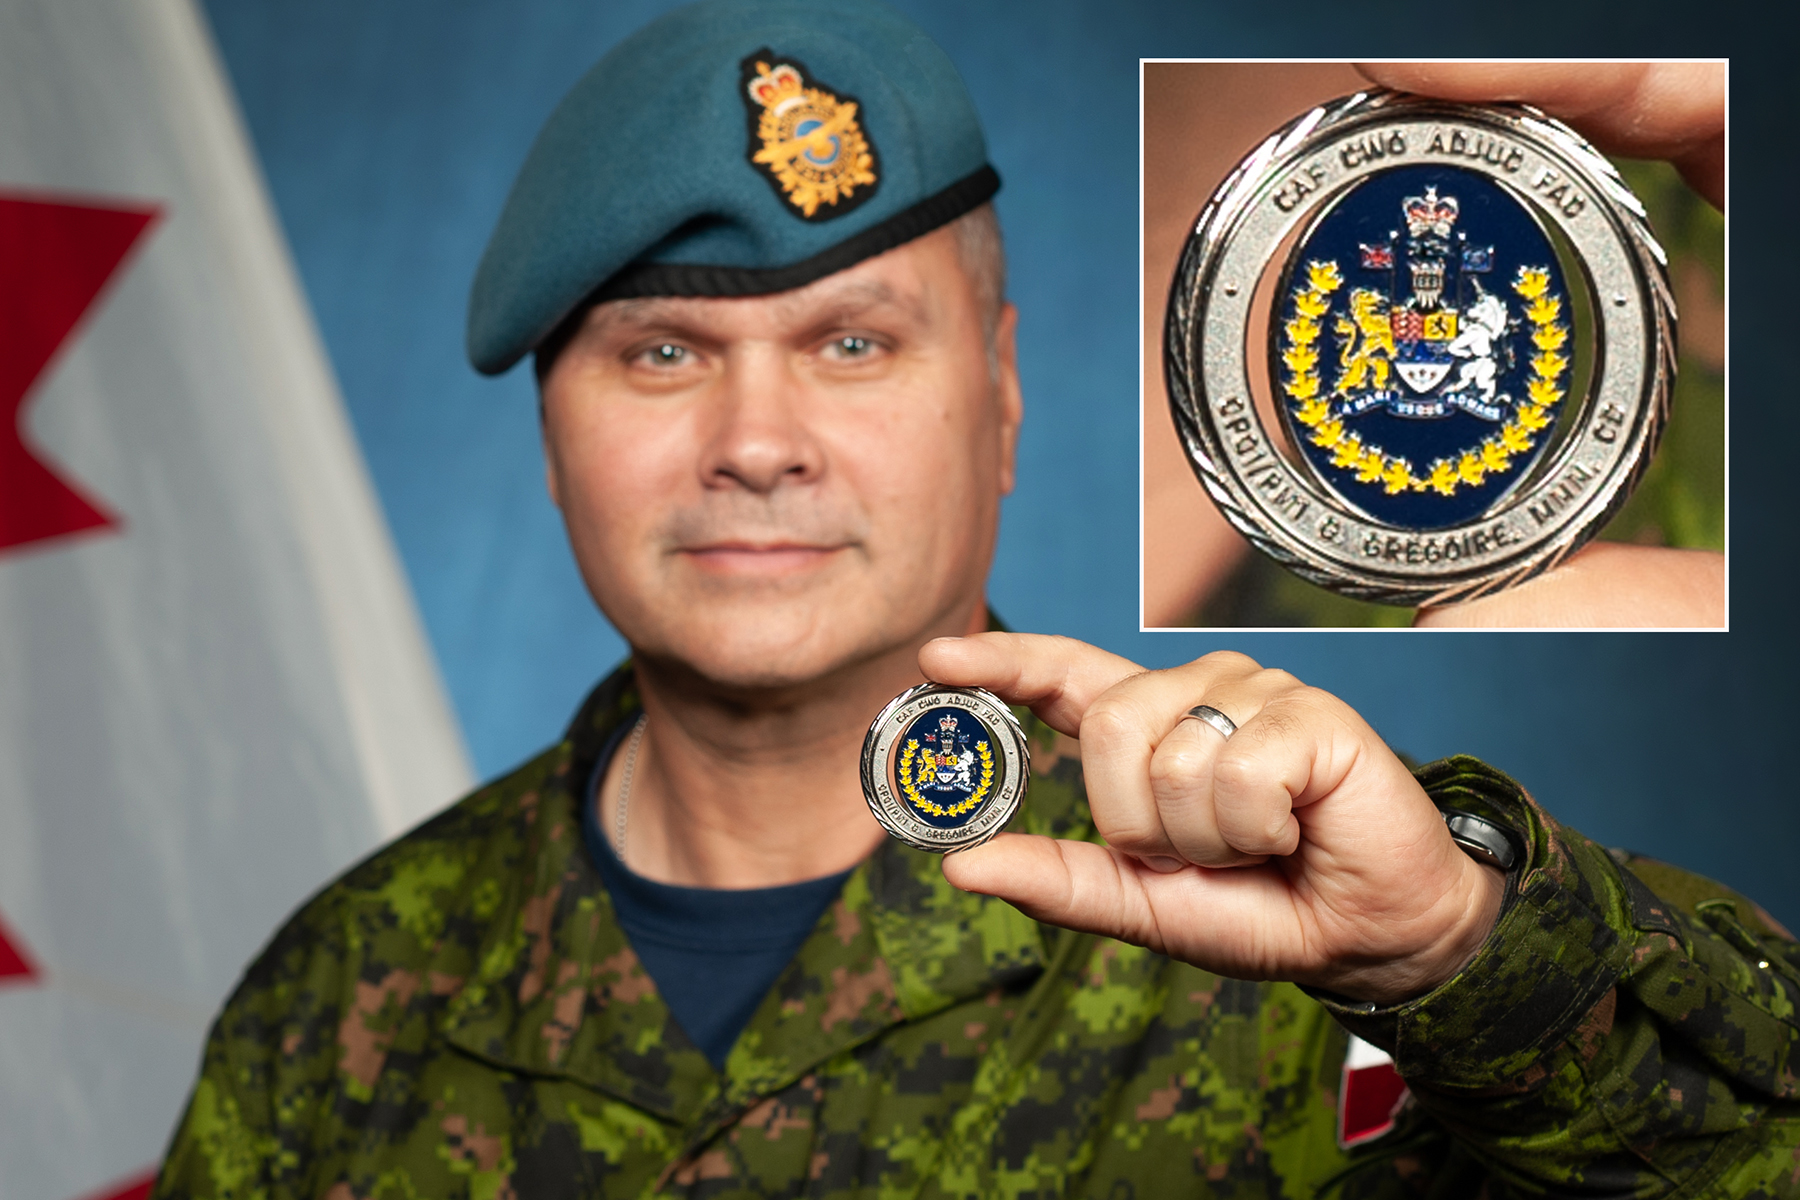 Warrant Officer Stephan Jaworski, proudly displays the CAF Chief’s coin he was presented on 24 June, 2021. Photo:  Corporal Robert Ouellette, 22 Wing Imagery Section.